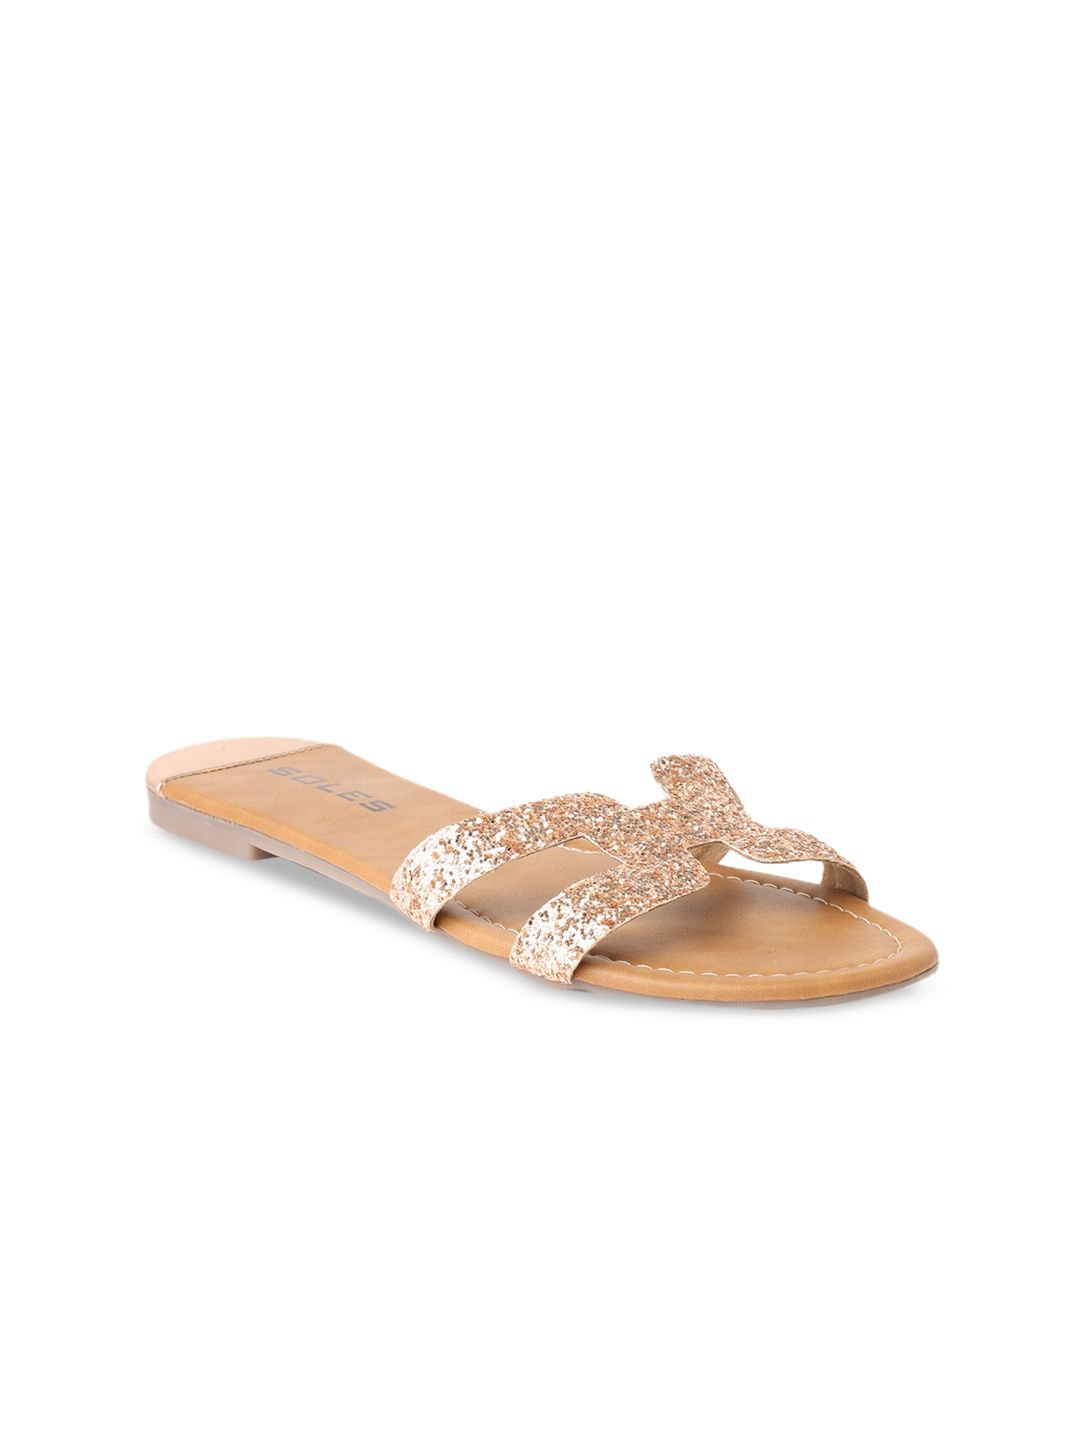 SOLES Embellished Open Toe Flats Price in India